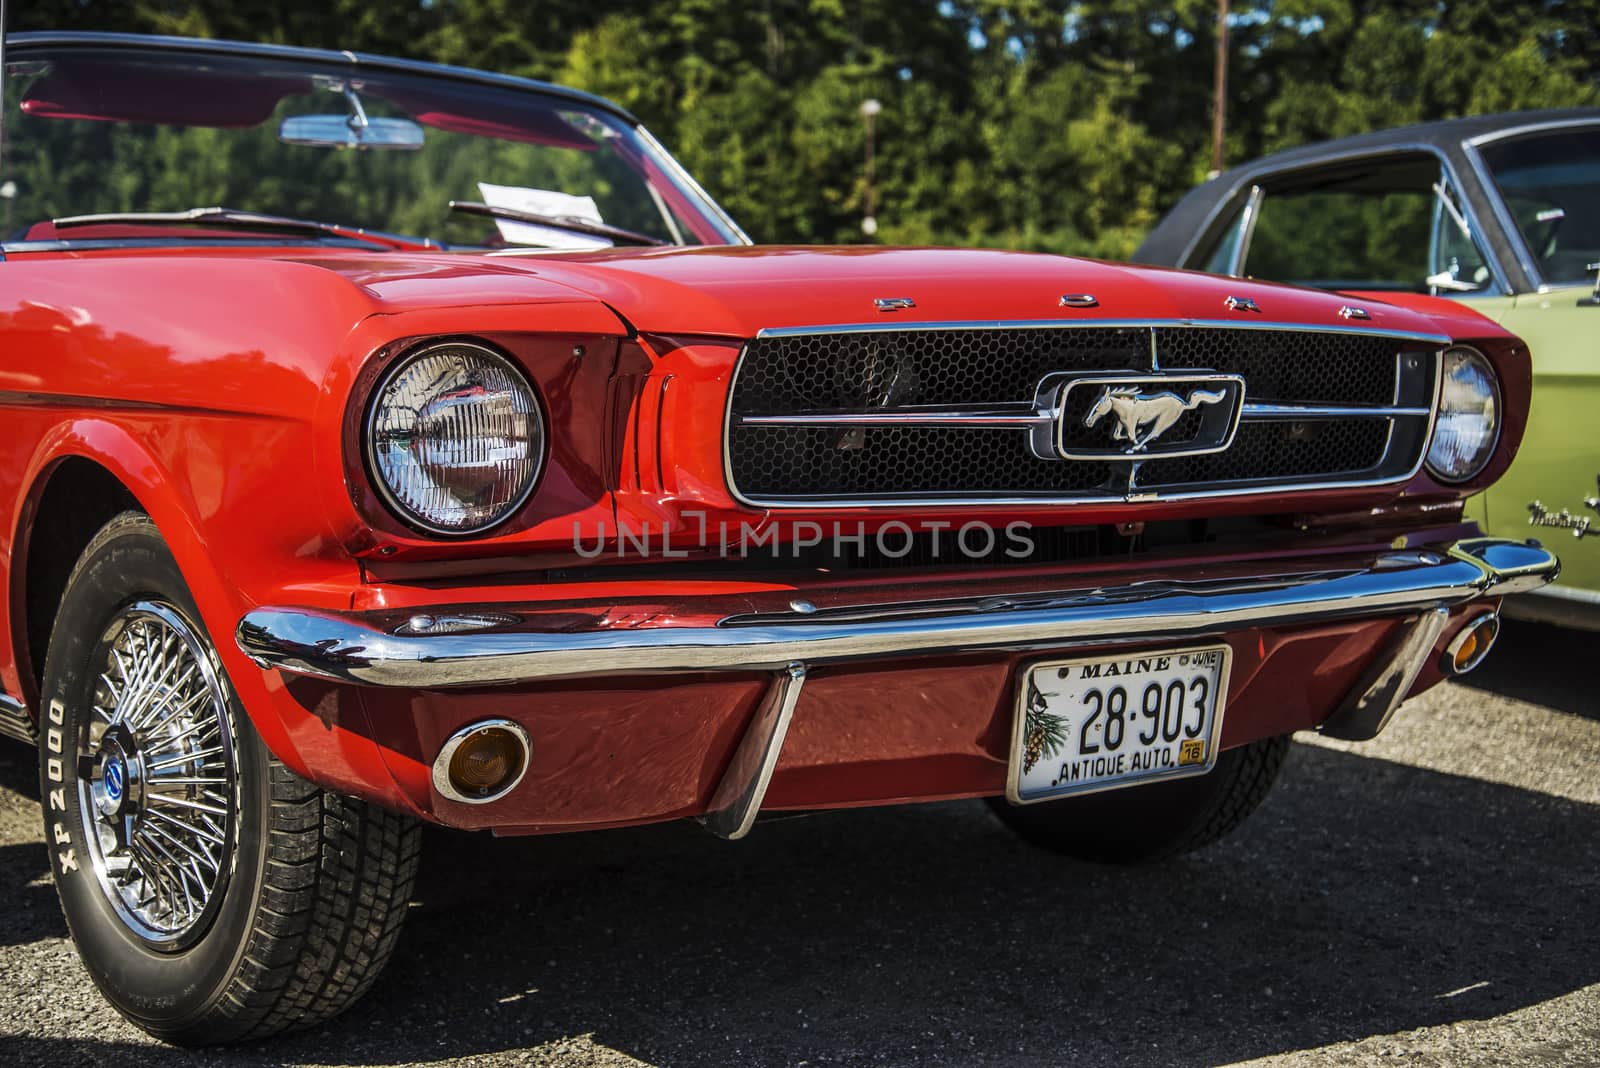 OLD ORCHARD BEAC, SEPTEMBER 26: Ford Mustang presented at the Motor Show on September 26, 2015 in Old Orchard Beach, Maine, USA